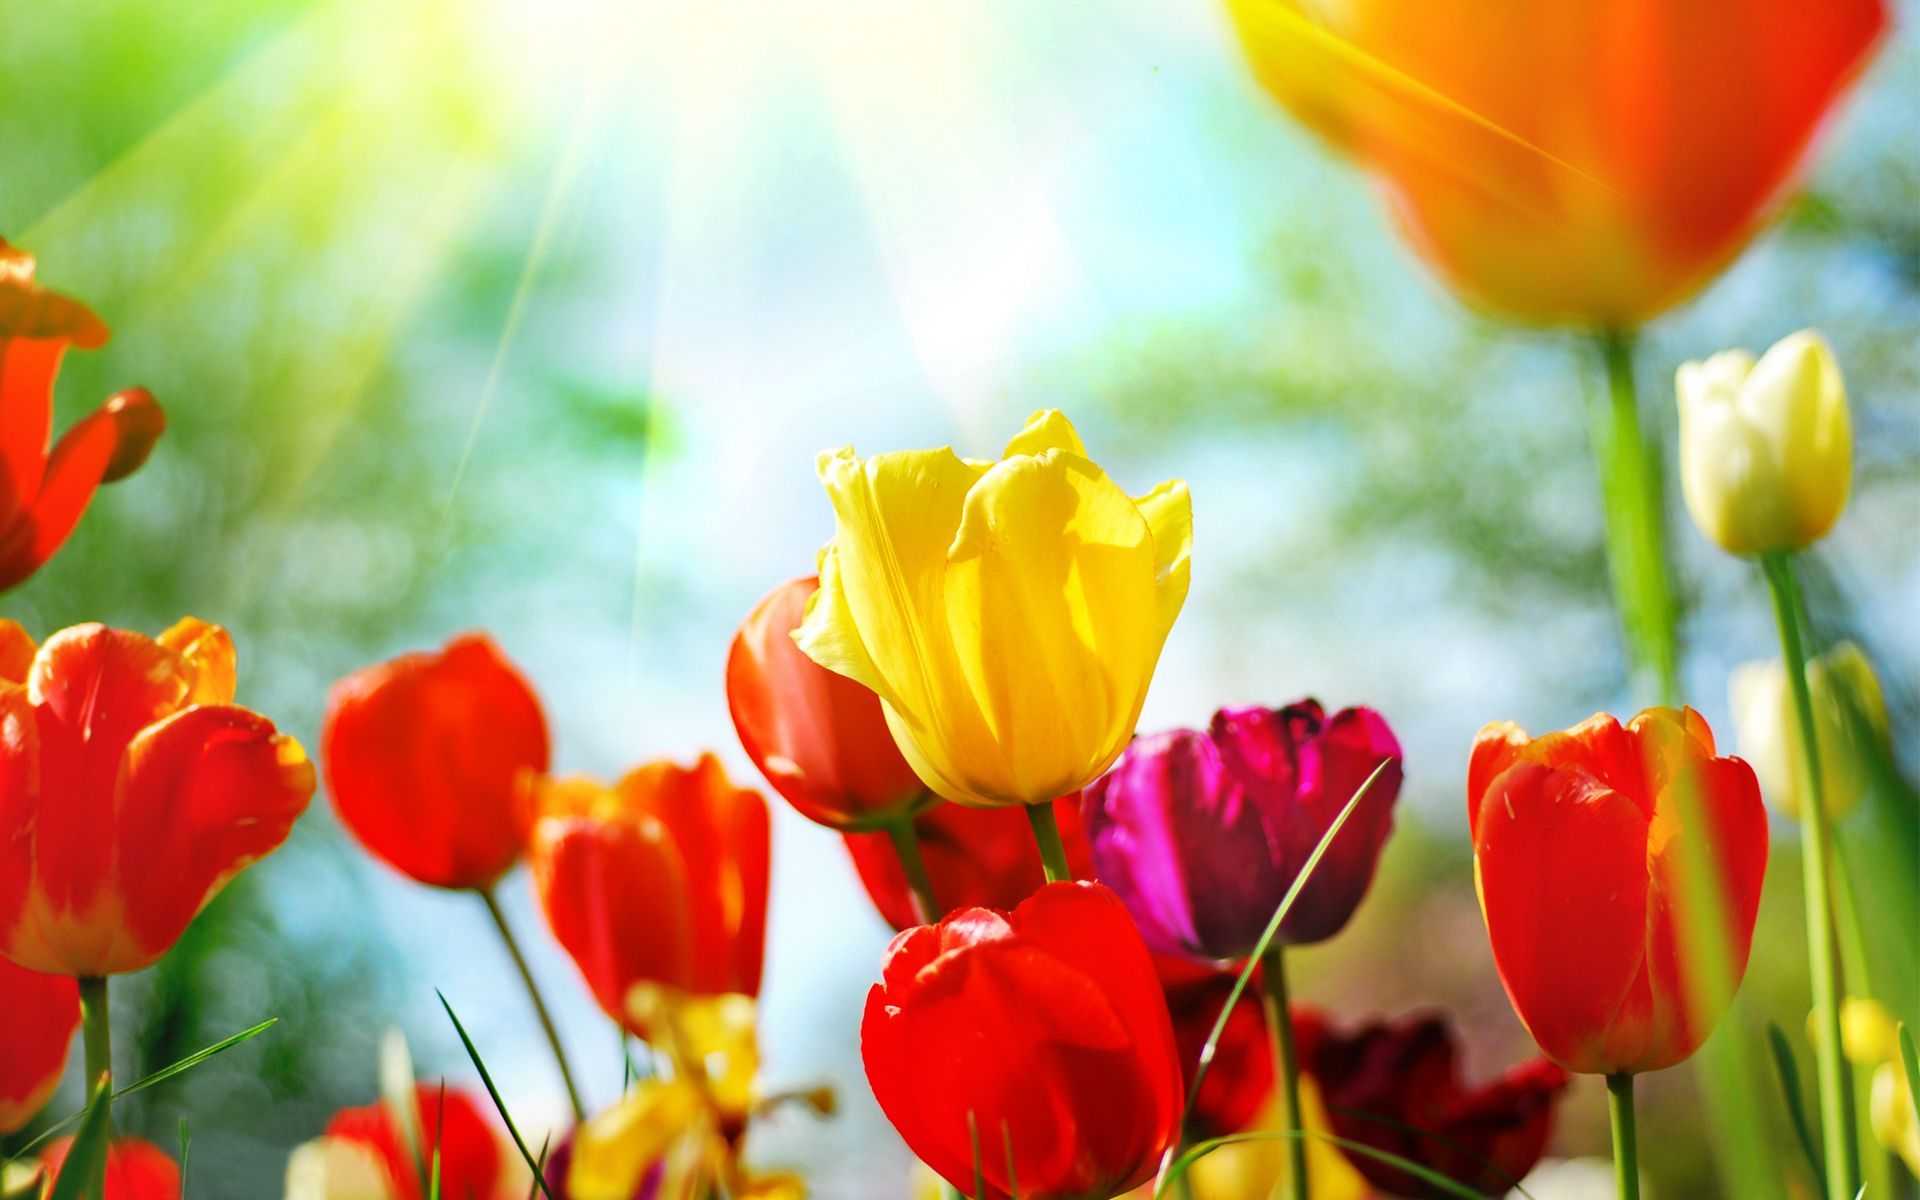 Spring Background free download | Wallpapers, Backgrounds, Images ...